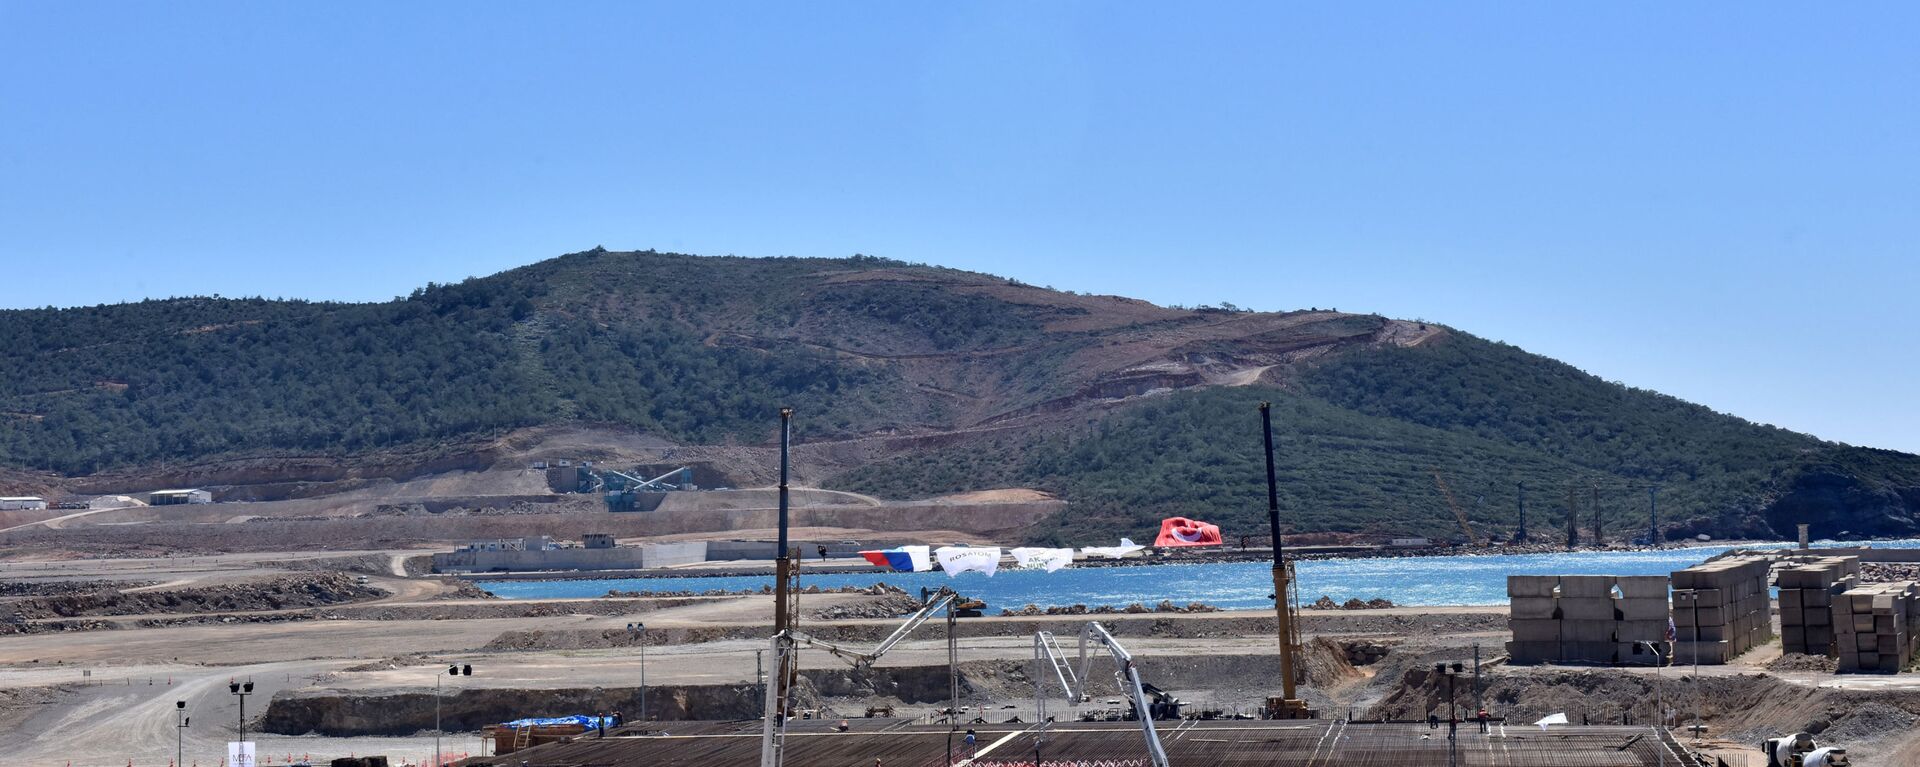 A view of the construction site of Turkey's first nuclear power plant 'Akkuyu', pictured during the opening ceremony in the Mediterranean Mersin region on April 3, 2018. - Turkish President Recep Tayyip Erdogan and Russian counterpart Vladimir Putin launched the construction of the $20 billion dollar Akkuyu nuclear power plant though a video link from Ankara where Putin is on an official visit.  - Sputnik International, 1920, 30.03.2023